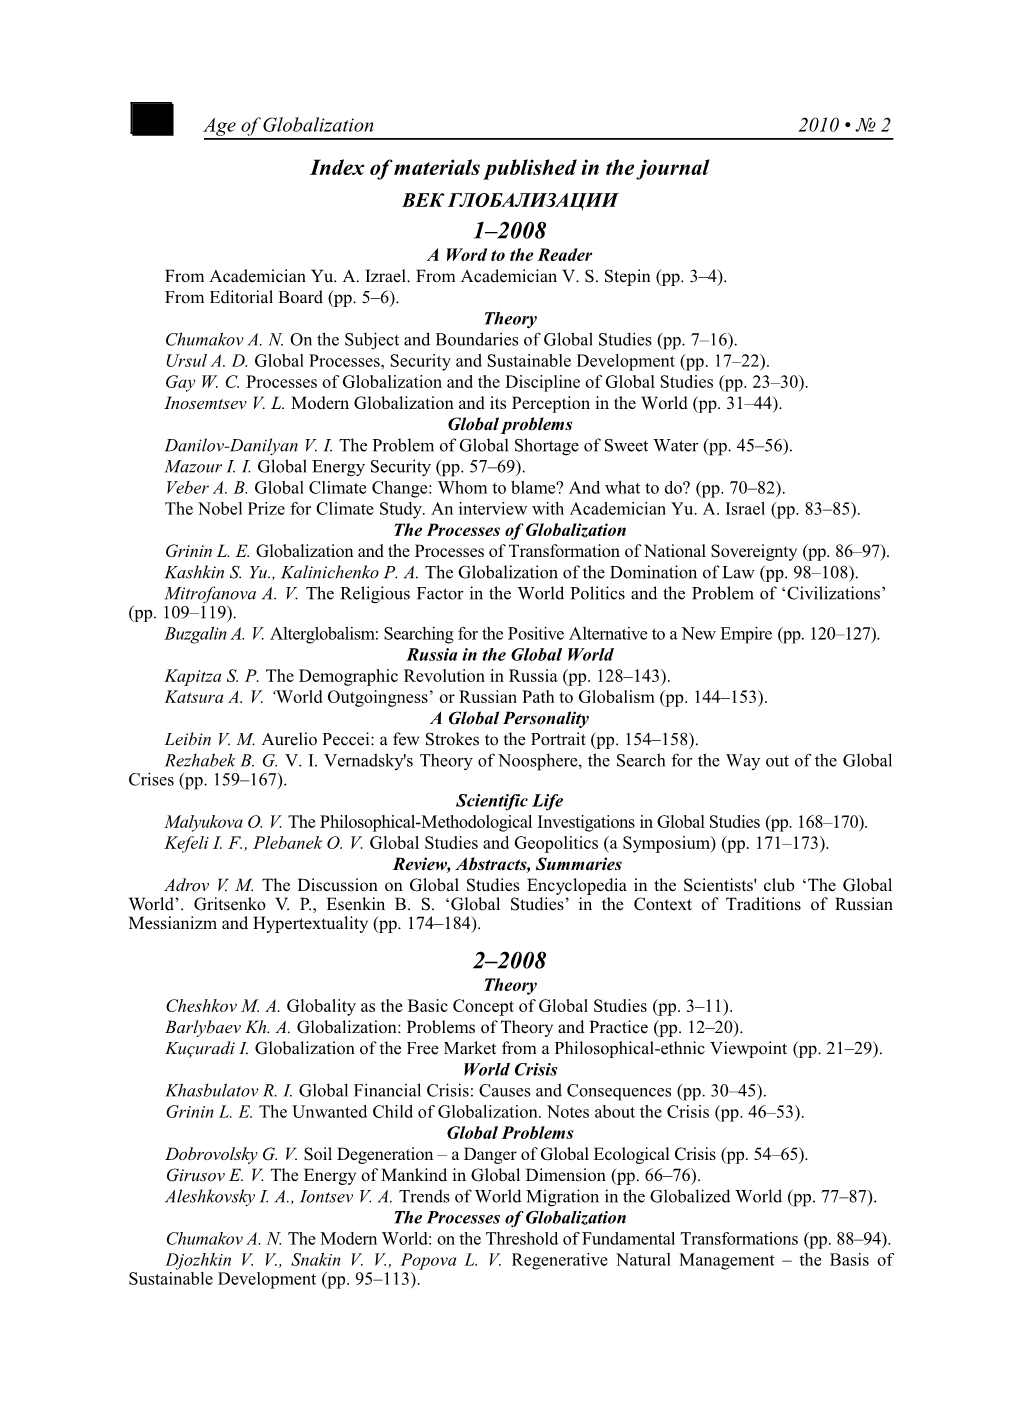 Index of Materials Published in the Journal